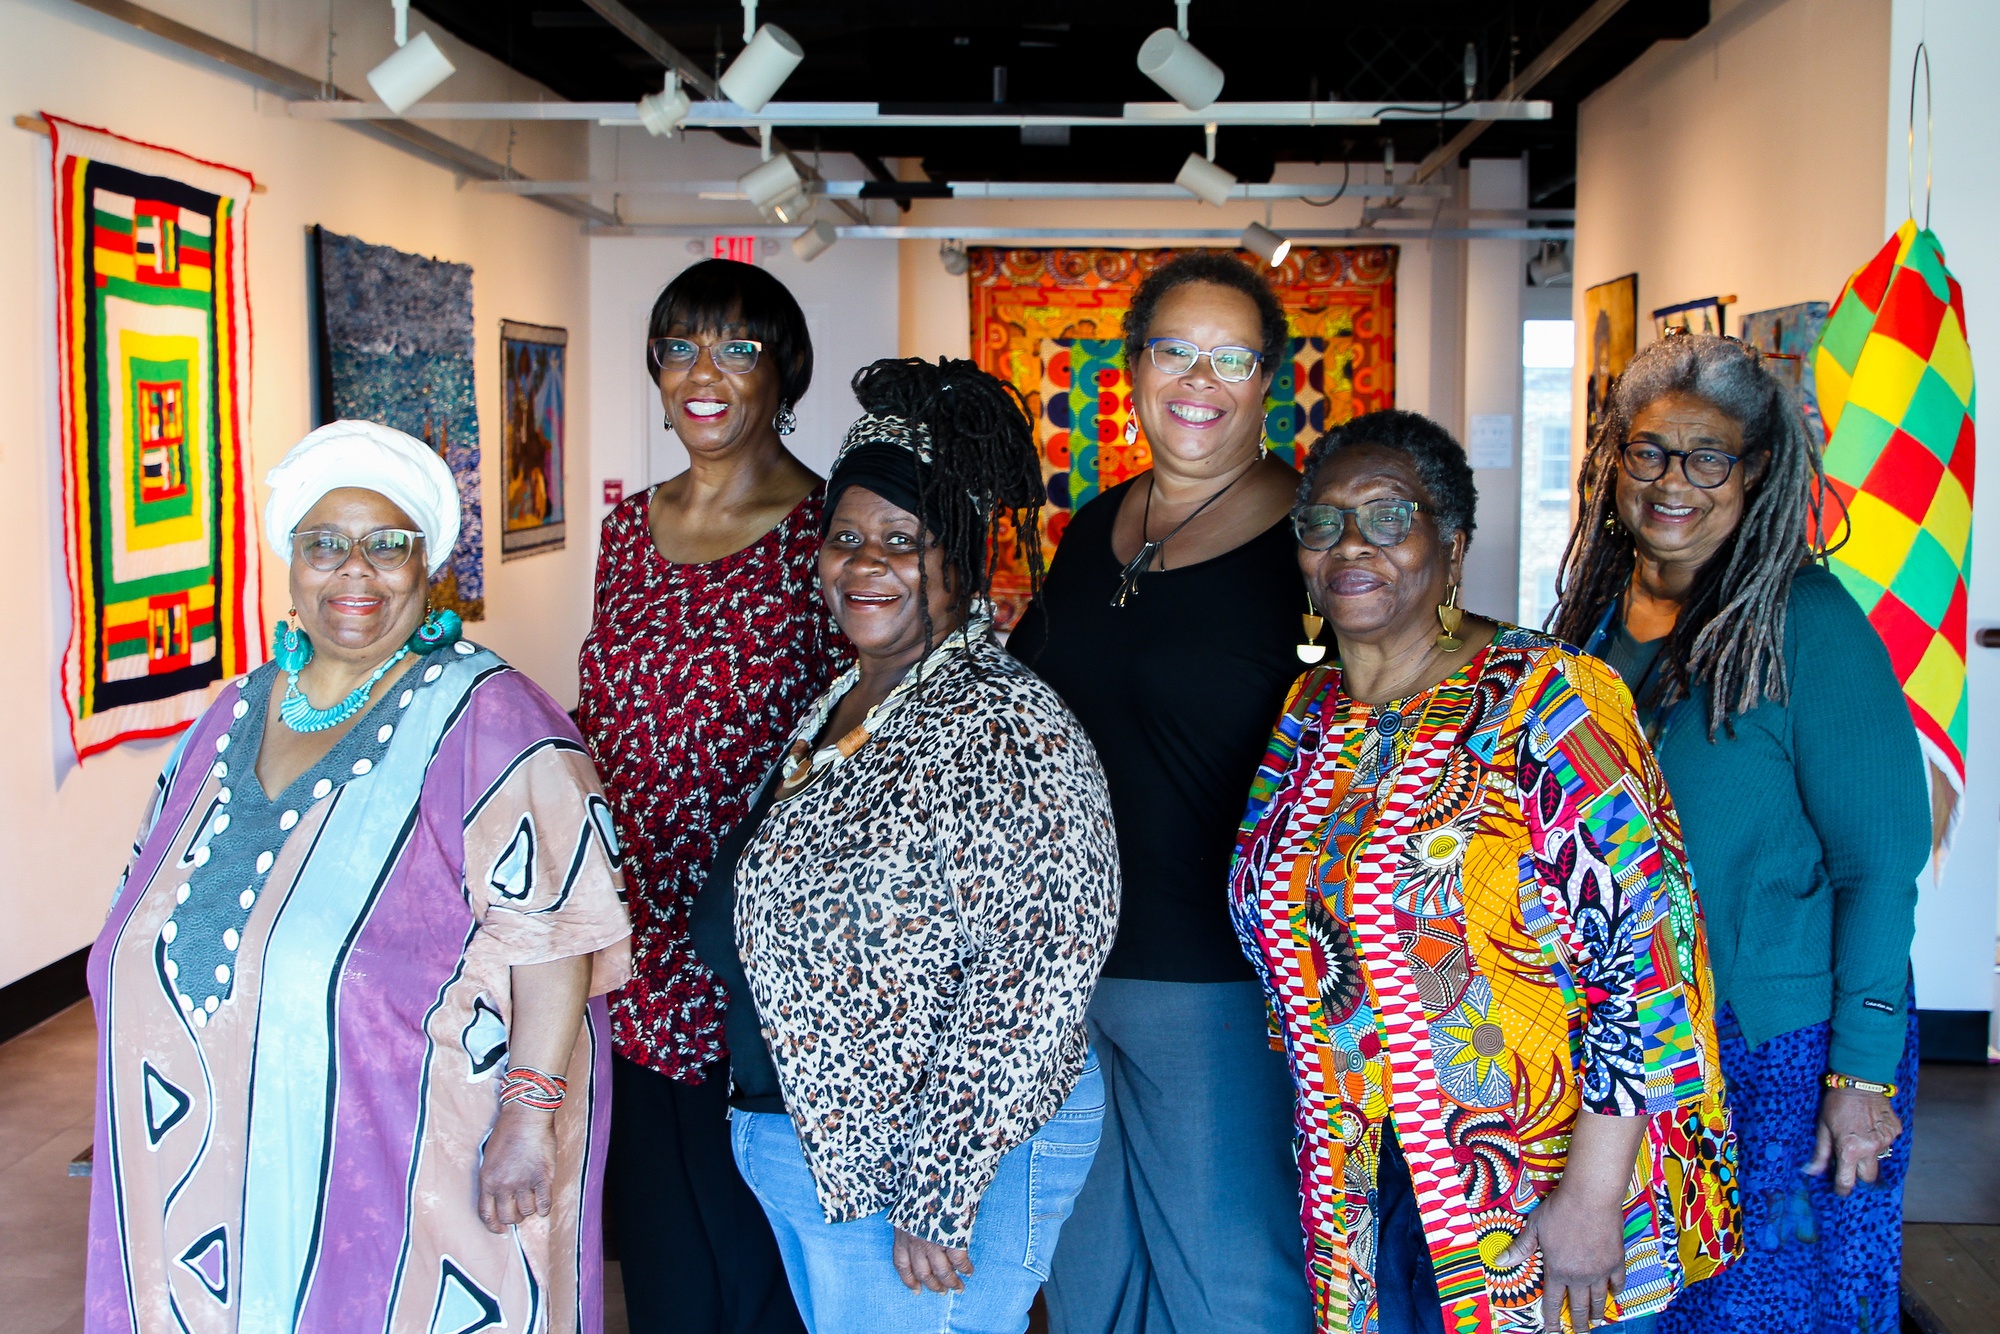 More than a dozen Black women fiber and textile artists were featured in the exhibit, Griots of Cotton, Indigo & Clay on display at Charleston's City Gallery in February. Local artist and exhibit curator, Torreah “Cookie” Washington (from left to right), stands with fellow artists, Lillie Fowler-Singleton, Georgette Sanders, Renee Fleuranges-Valdes, Carolyn Brackat, and Arianne King Comer.